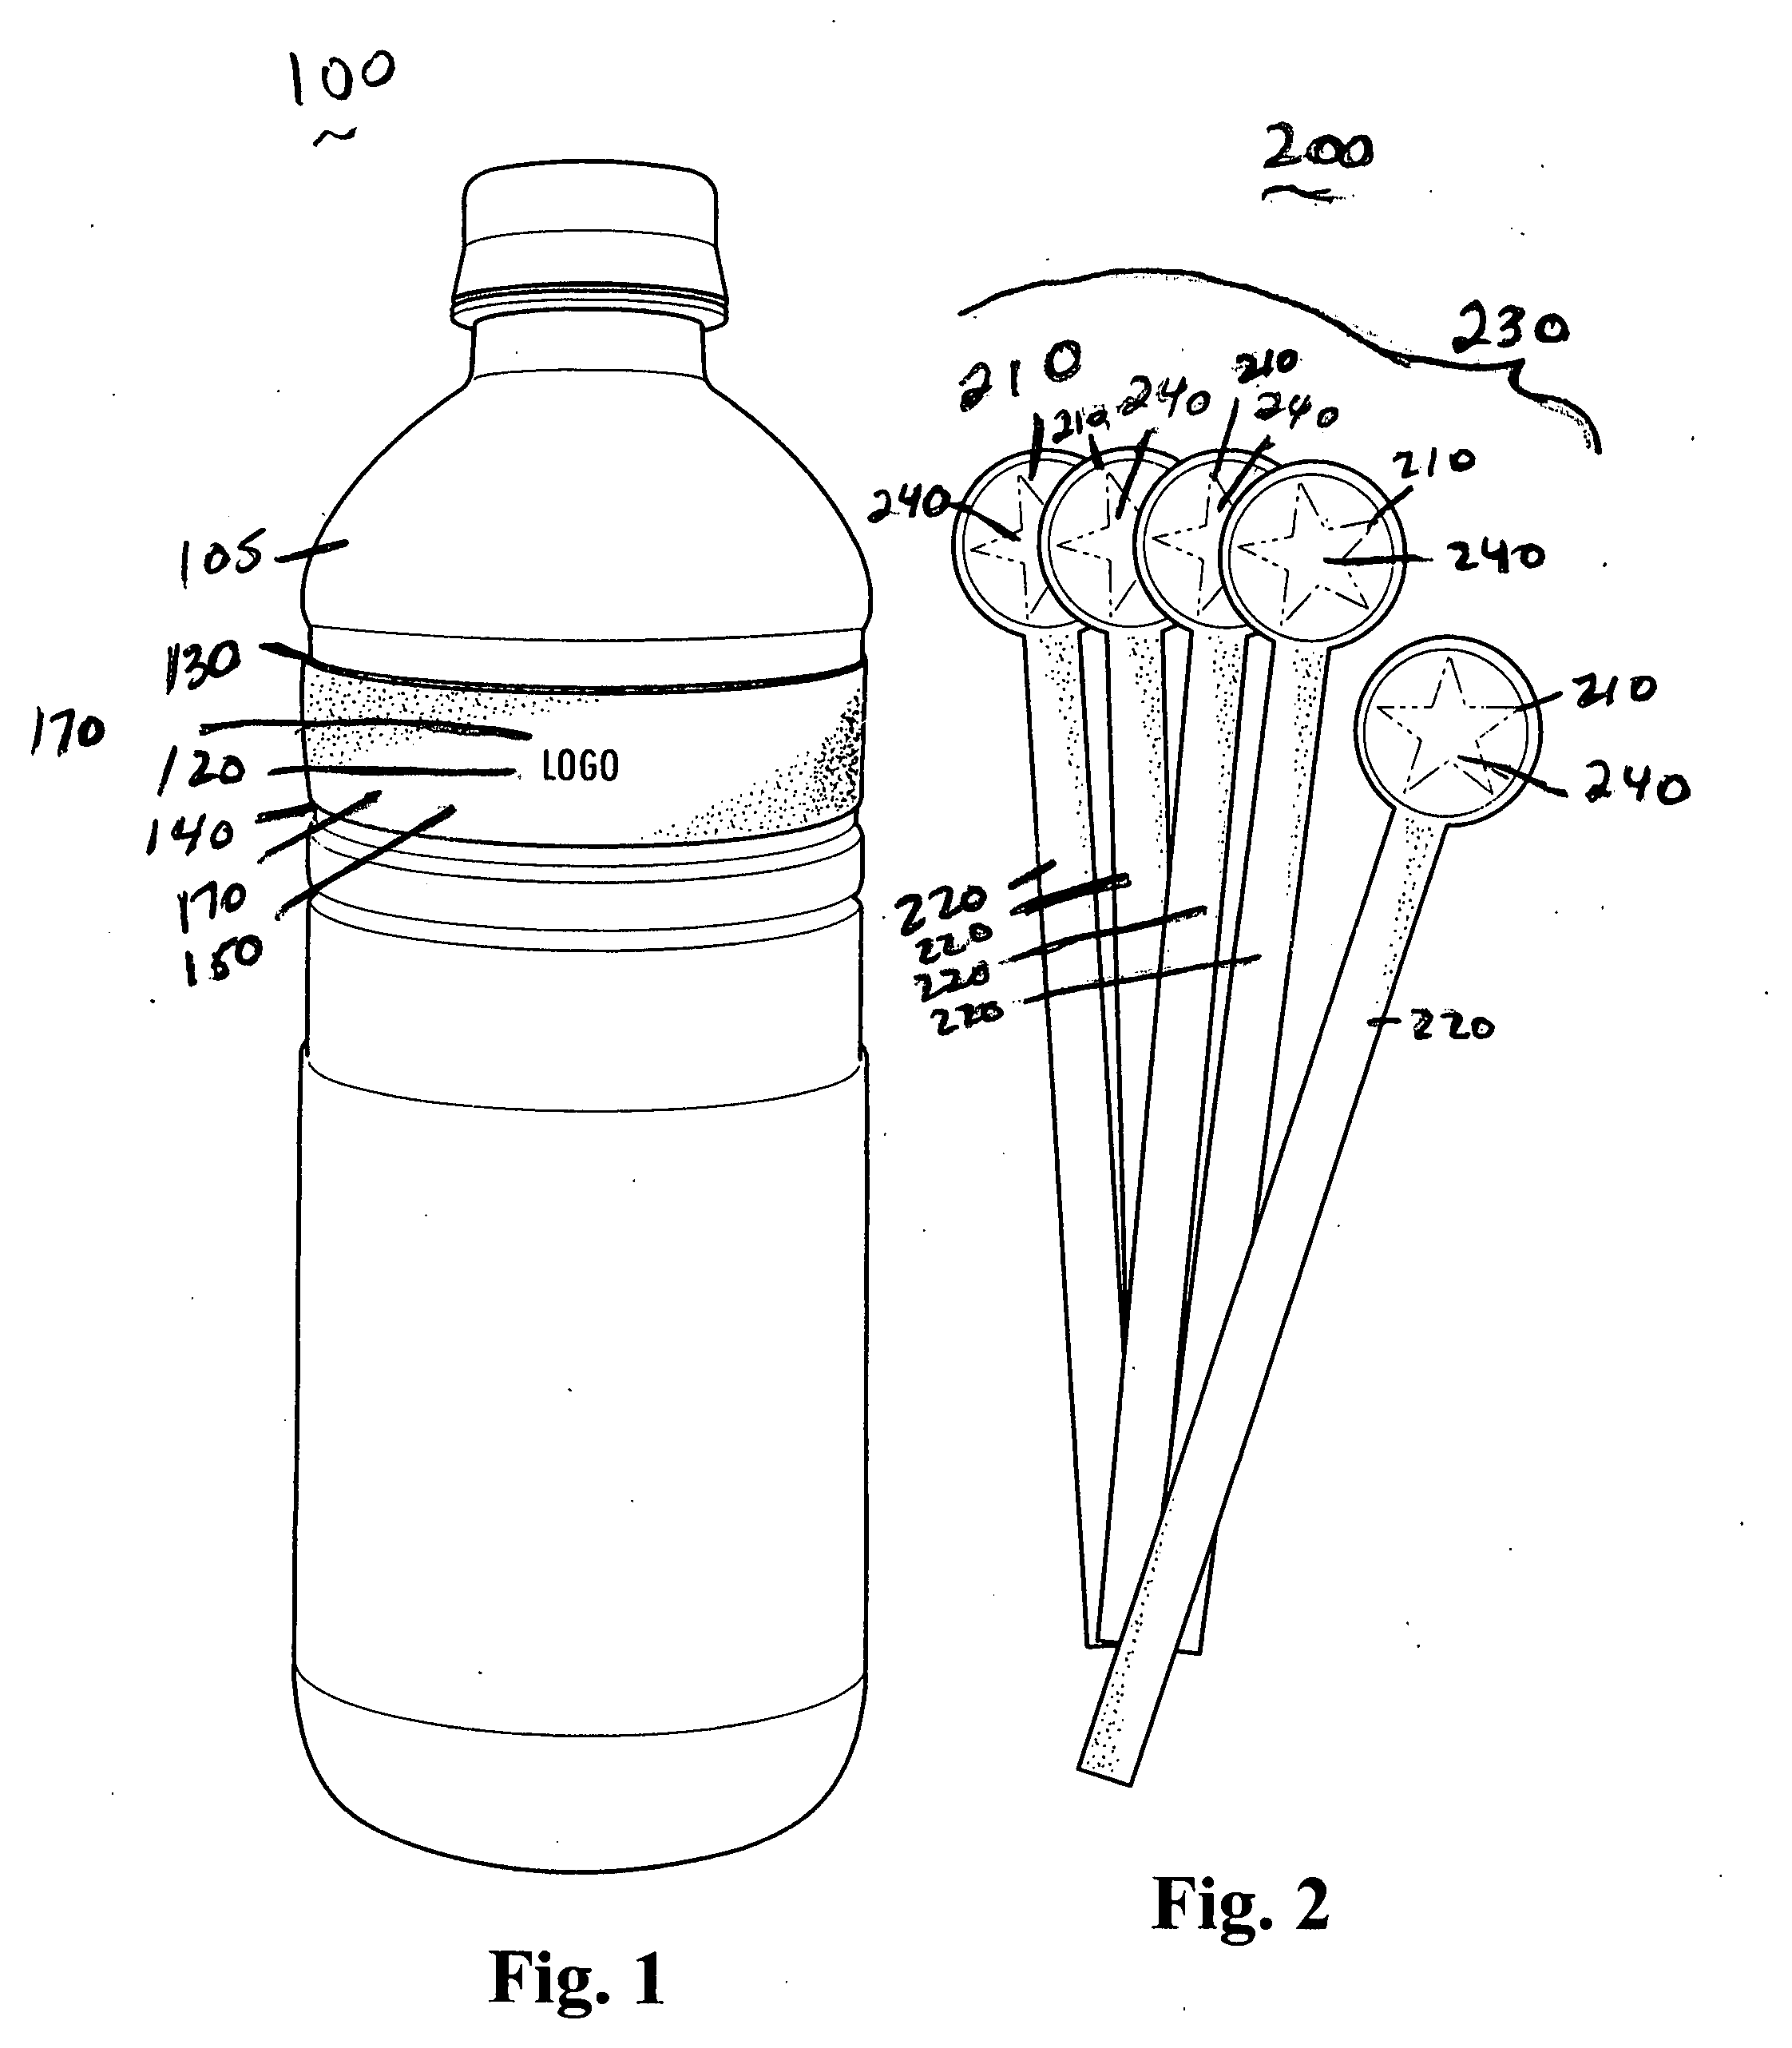 Unique identifying device for a beverage container